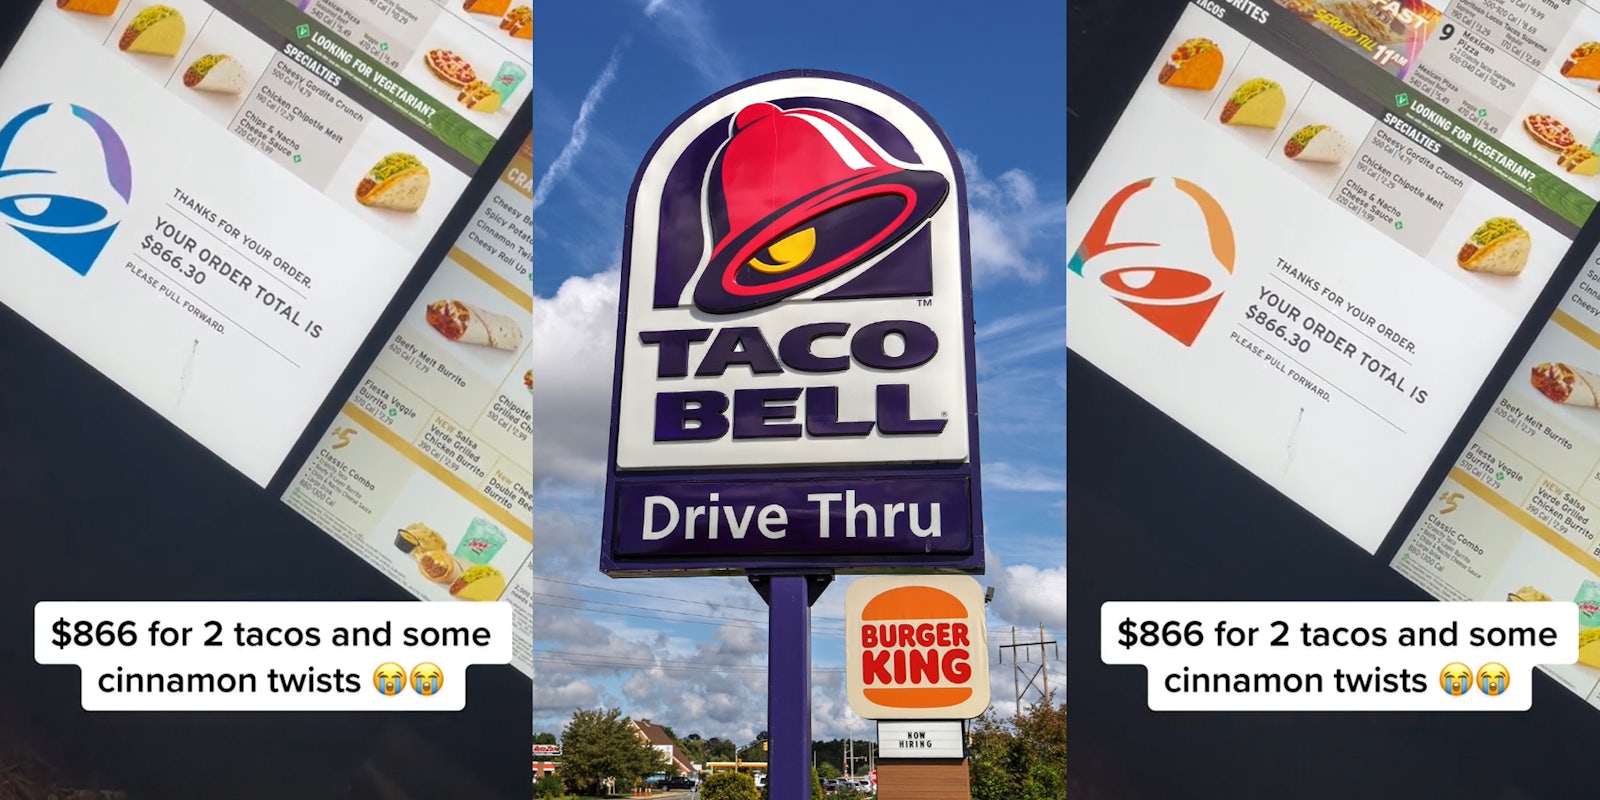 Taco Bell drive thru menu with screen displaying 'YOUR ORDER TOTAL IS $866.30' with caption '$866 for 2 tacos and some cinnamon twists' (l) Taco Bell drive thru sign outside with blue sky (c) Taco Bell drive thru menu with screen displaying 'YOUR ORDER TOTAL IS $866.30' with caption '$866 for 2 tacos and some cinnamon twists' (r)